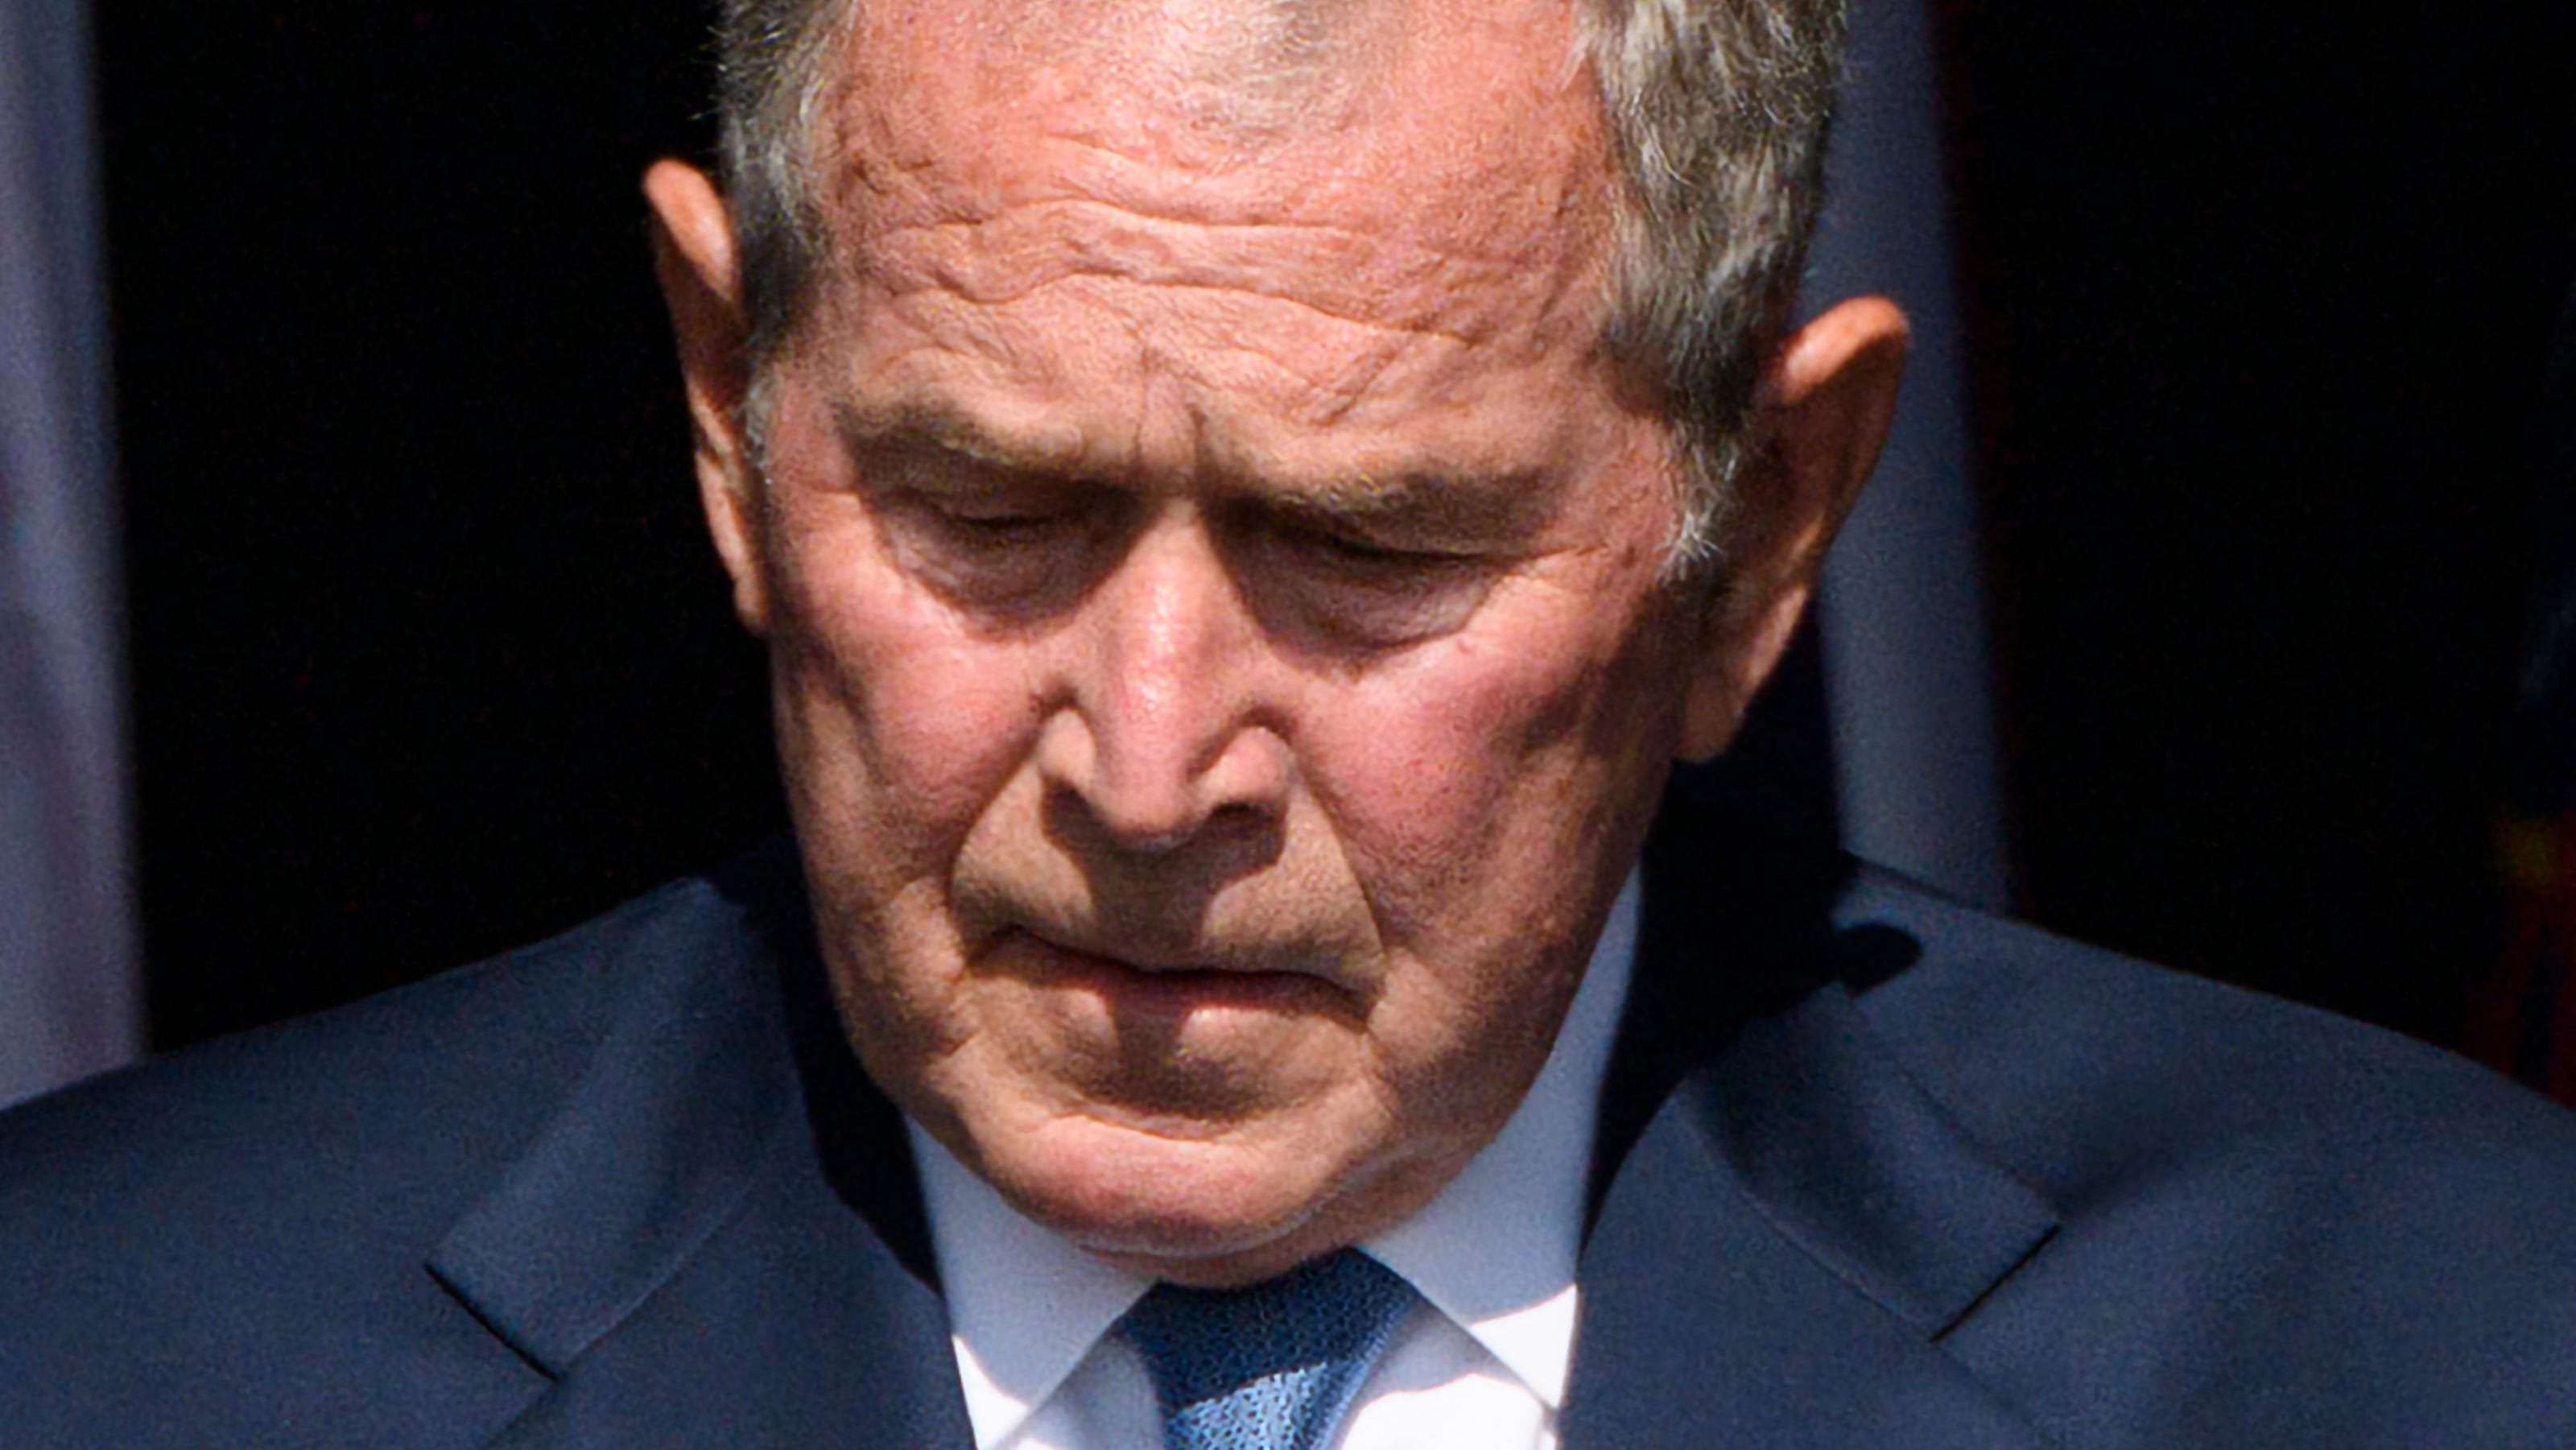 image for 'Children of the same foul spirit.' George W. Bush compares violent domestic extremists to 9/11 terrorists